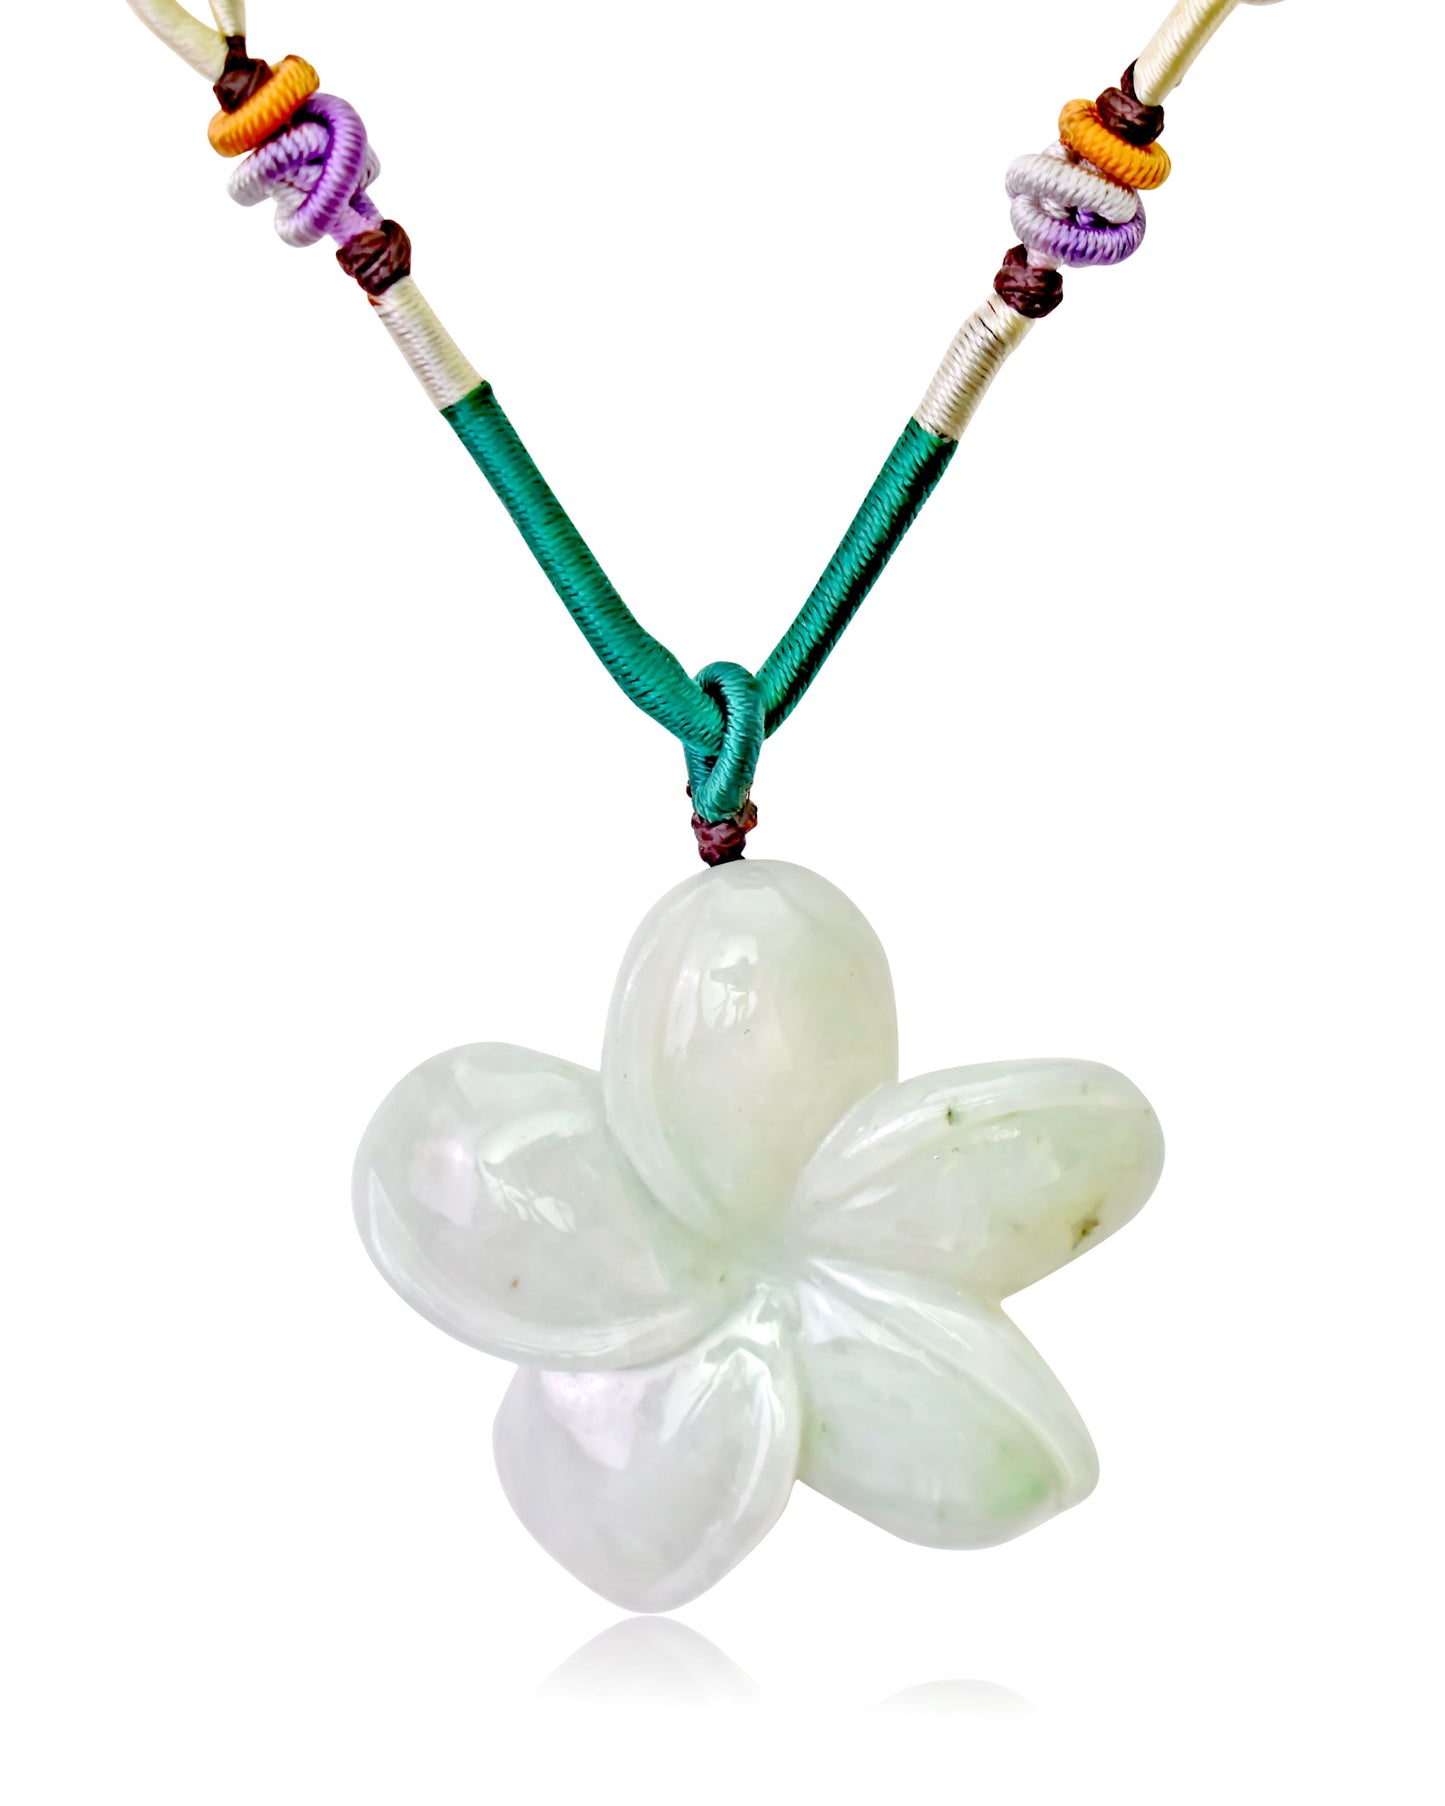 Accessorize in Beauty with Plumeria Flower Jade Necklace